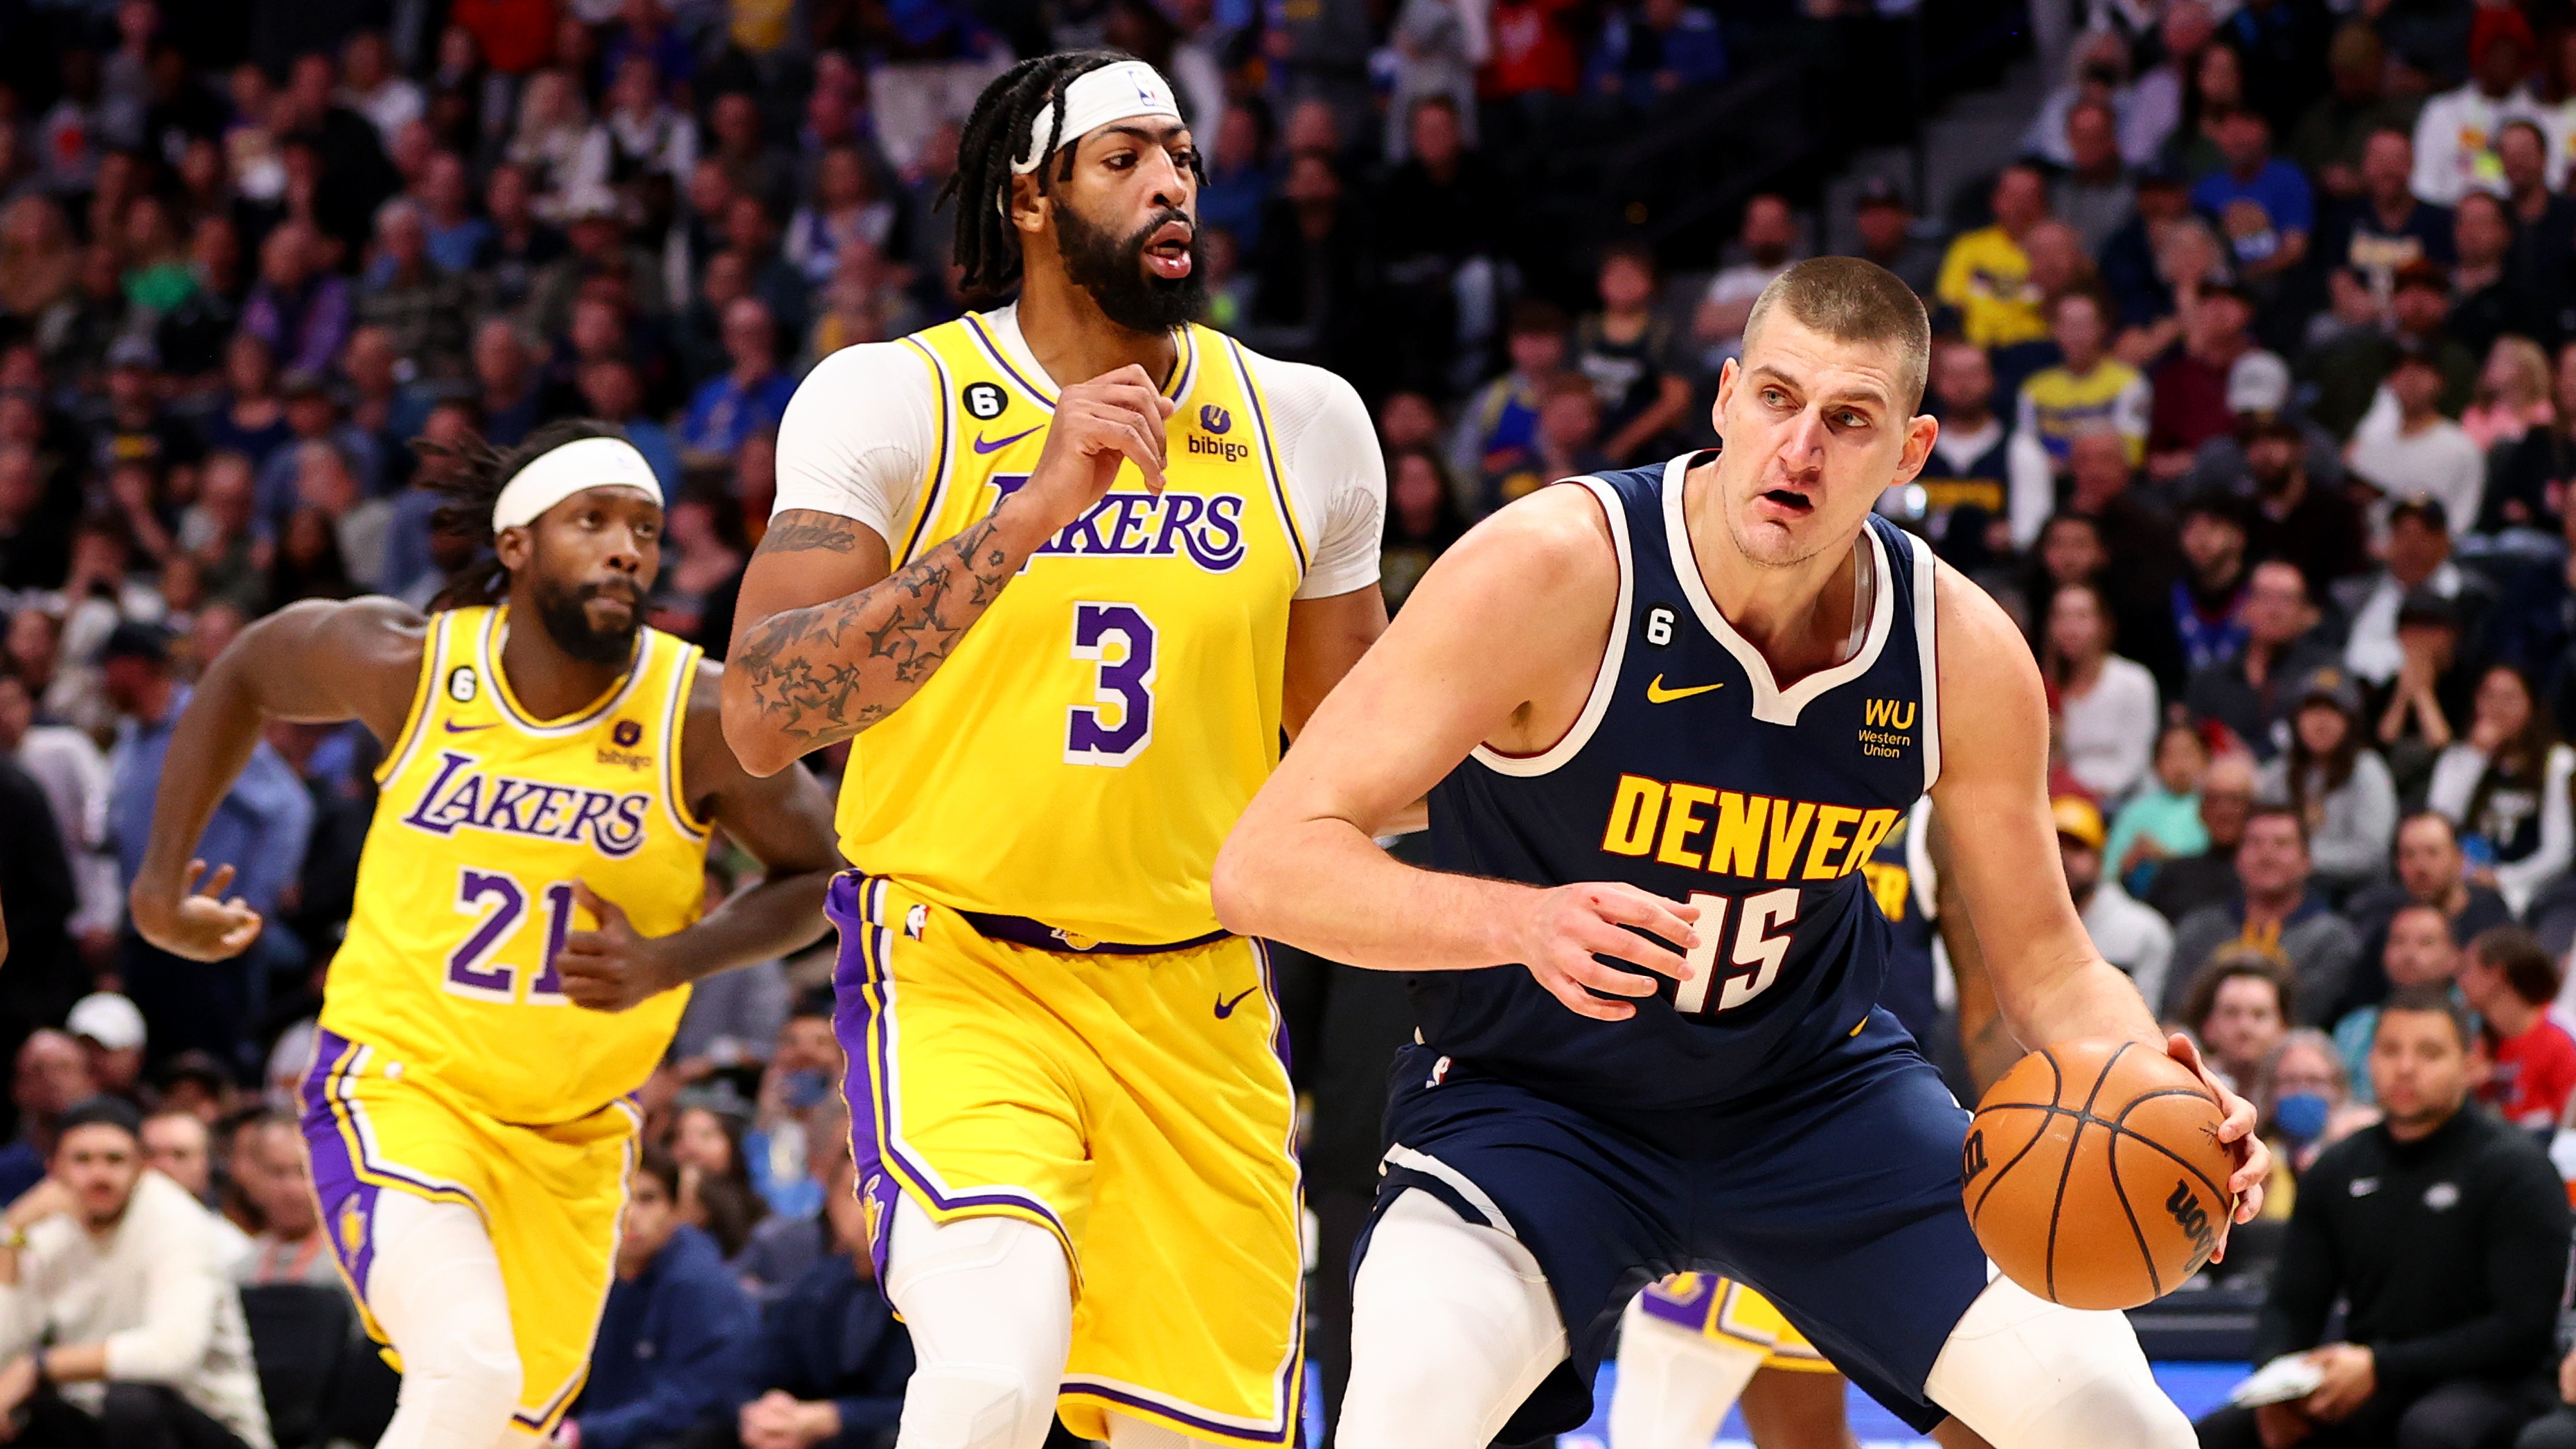 Nuggets vs Lakers live stream how to watch 2023 NBA Playoffs Western Conference Finals, Game 4 TechRadar